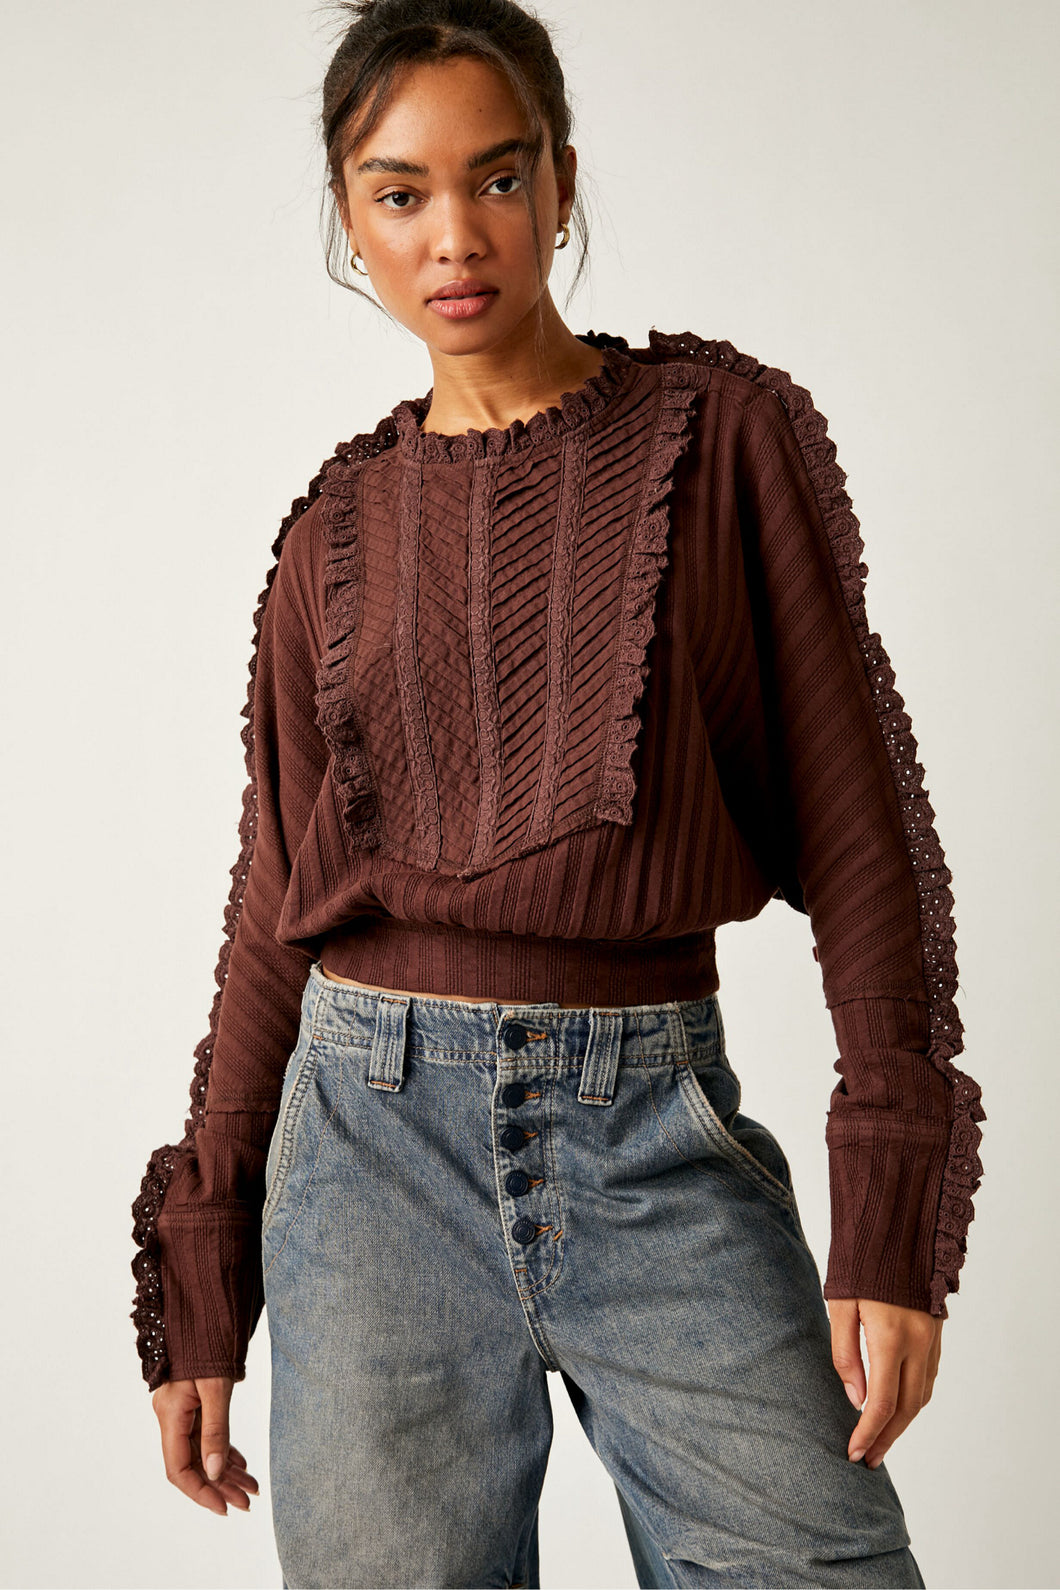 Free People Size X- Small Brown Top- Ladies